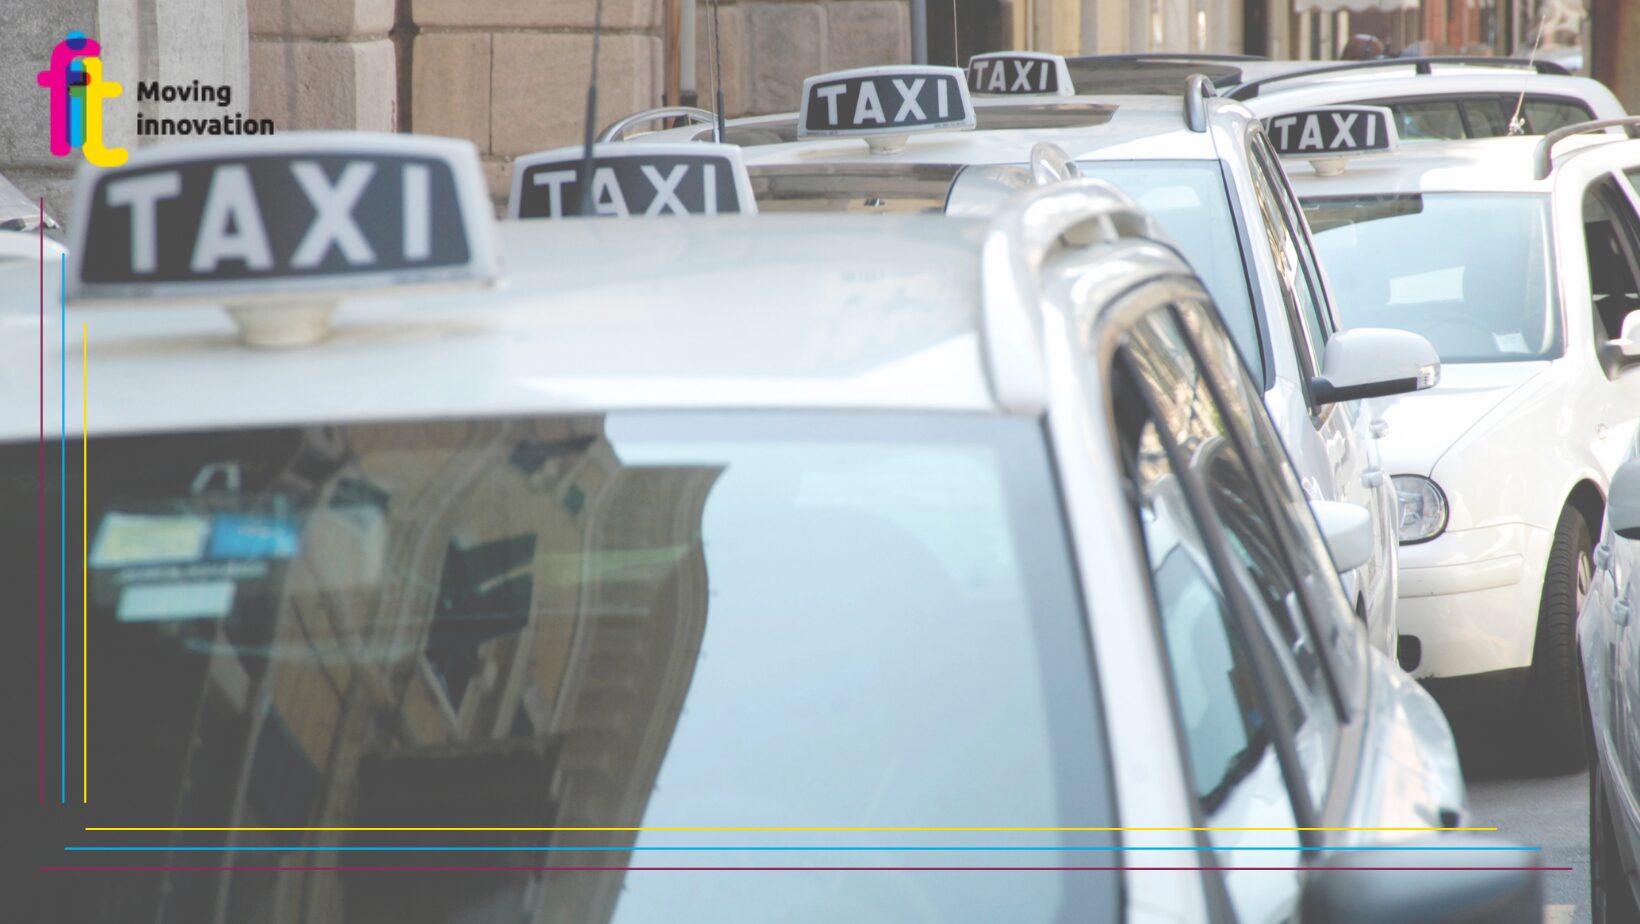 The Municipality of Parma entrusts FIT with the study for the preparation of the call for new Taxi licences